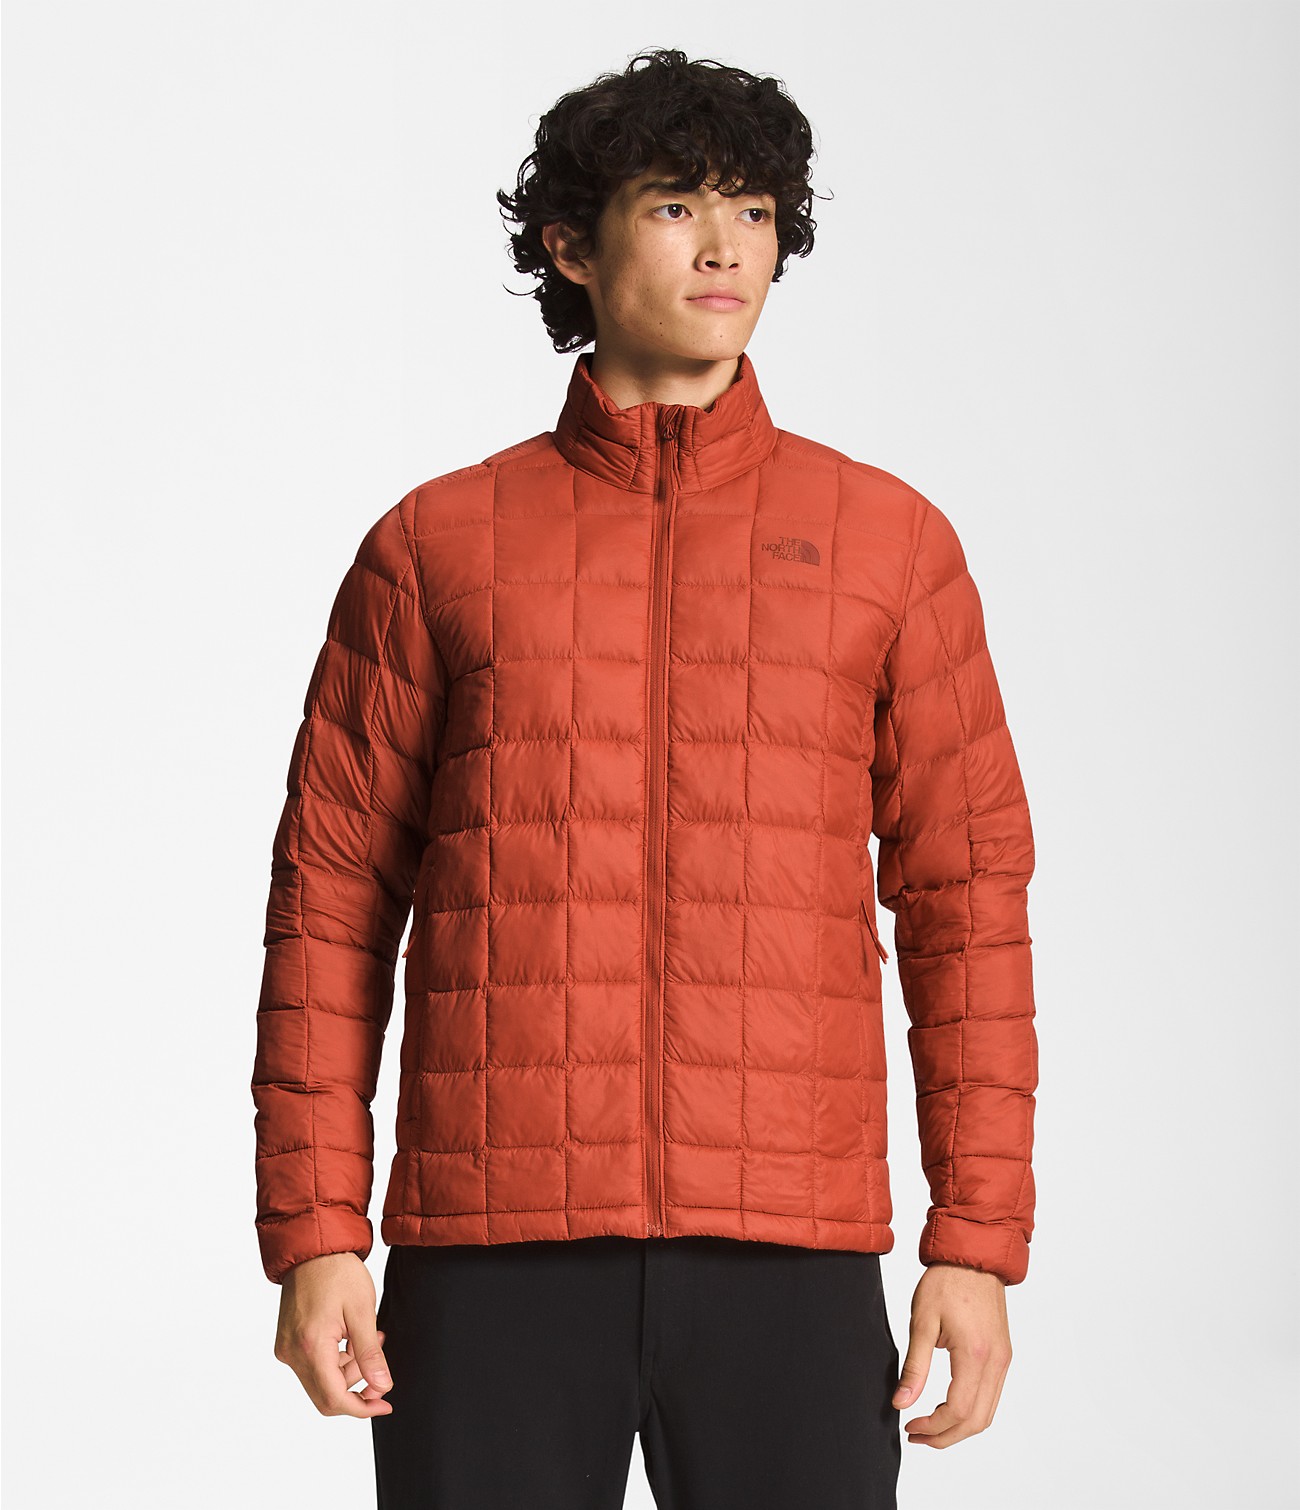 Unlock Wilderness' choice in the Mountain Hardwear Vs North Face comparison, the ThermoBall™ Eco Jacket 2.0 by The North Face